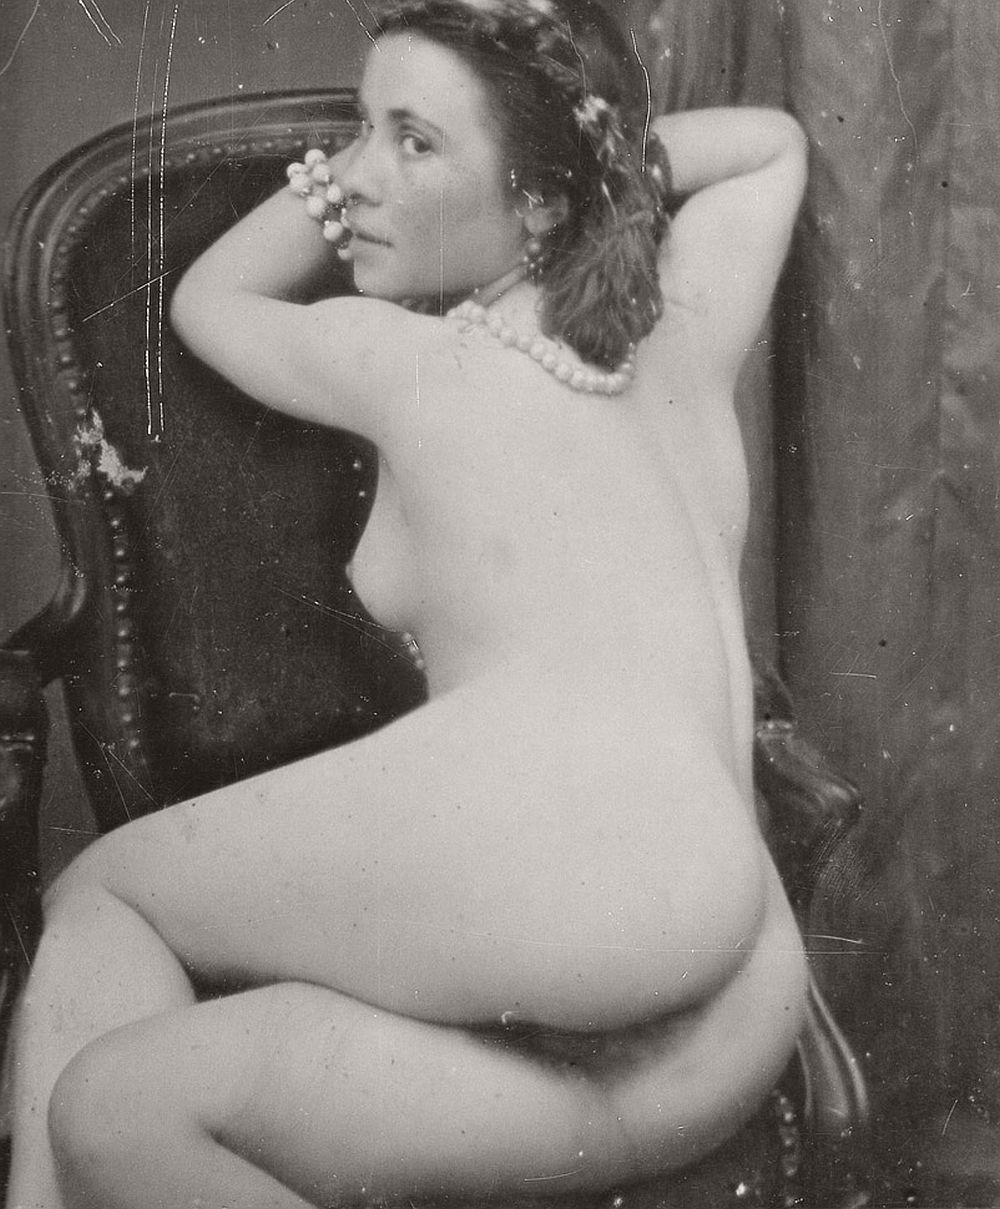 1920s,erotica,featured,french postcard,nudes,retro,vintage.